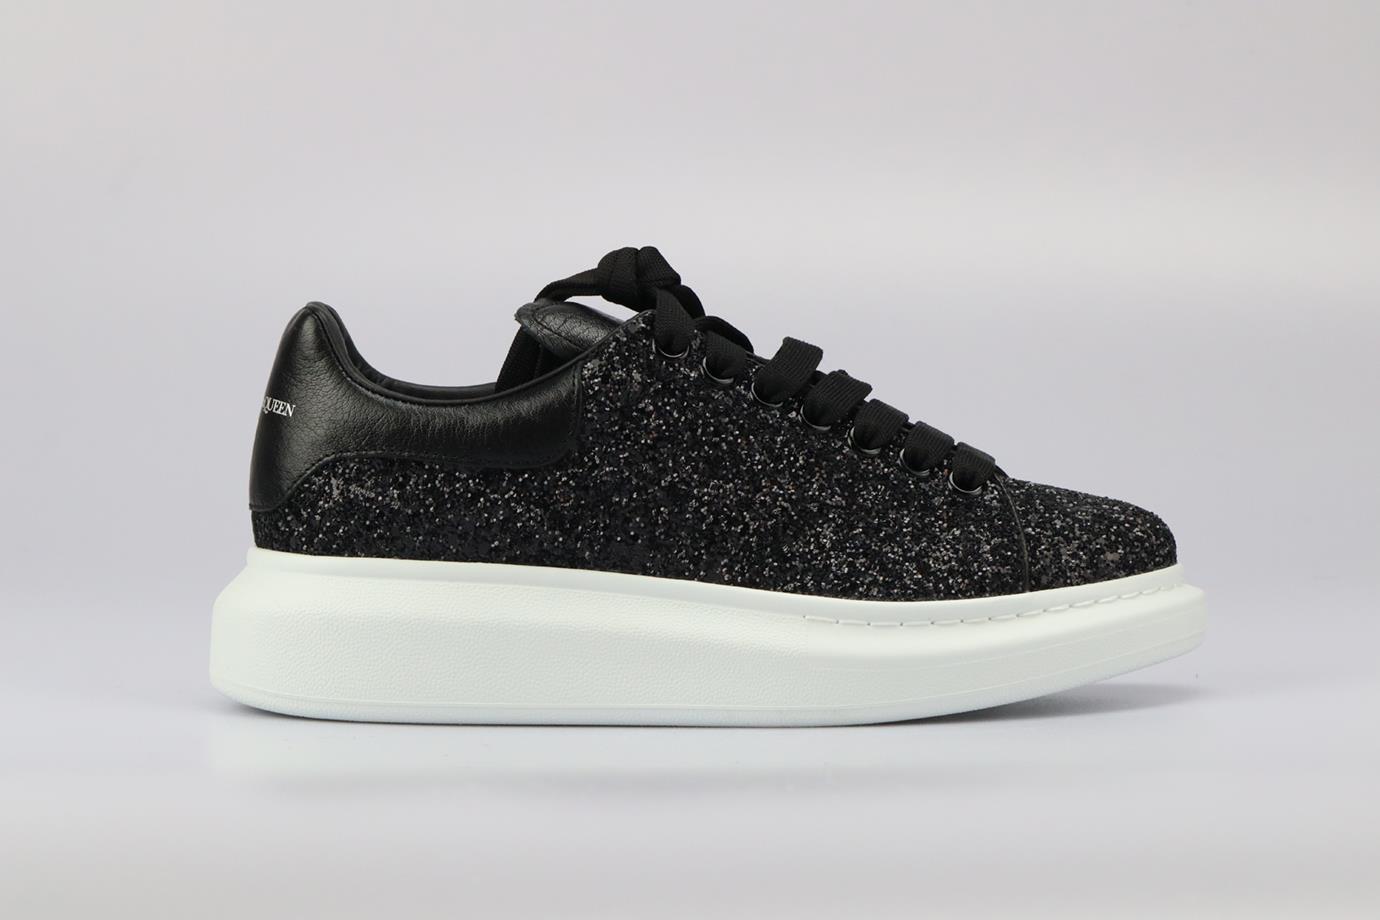 Alexander Mcqueen Glittered Leather Platform Sneakers. Black and white. Lace up fastening - Front. Comes with - extra laces. EU 40 (UK 7, US 10). Insole: 11.3 in. Heel height: 1.7 in. Platform: 1.7 in. Condition: New without box.